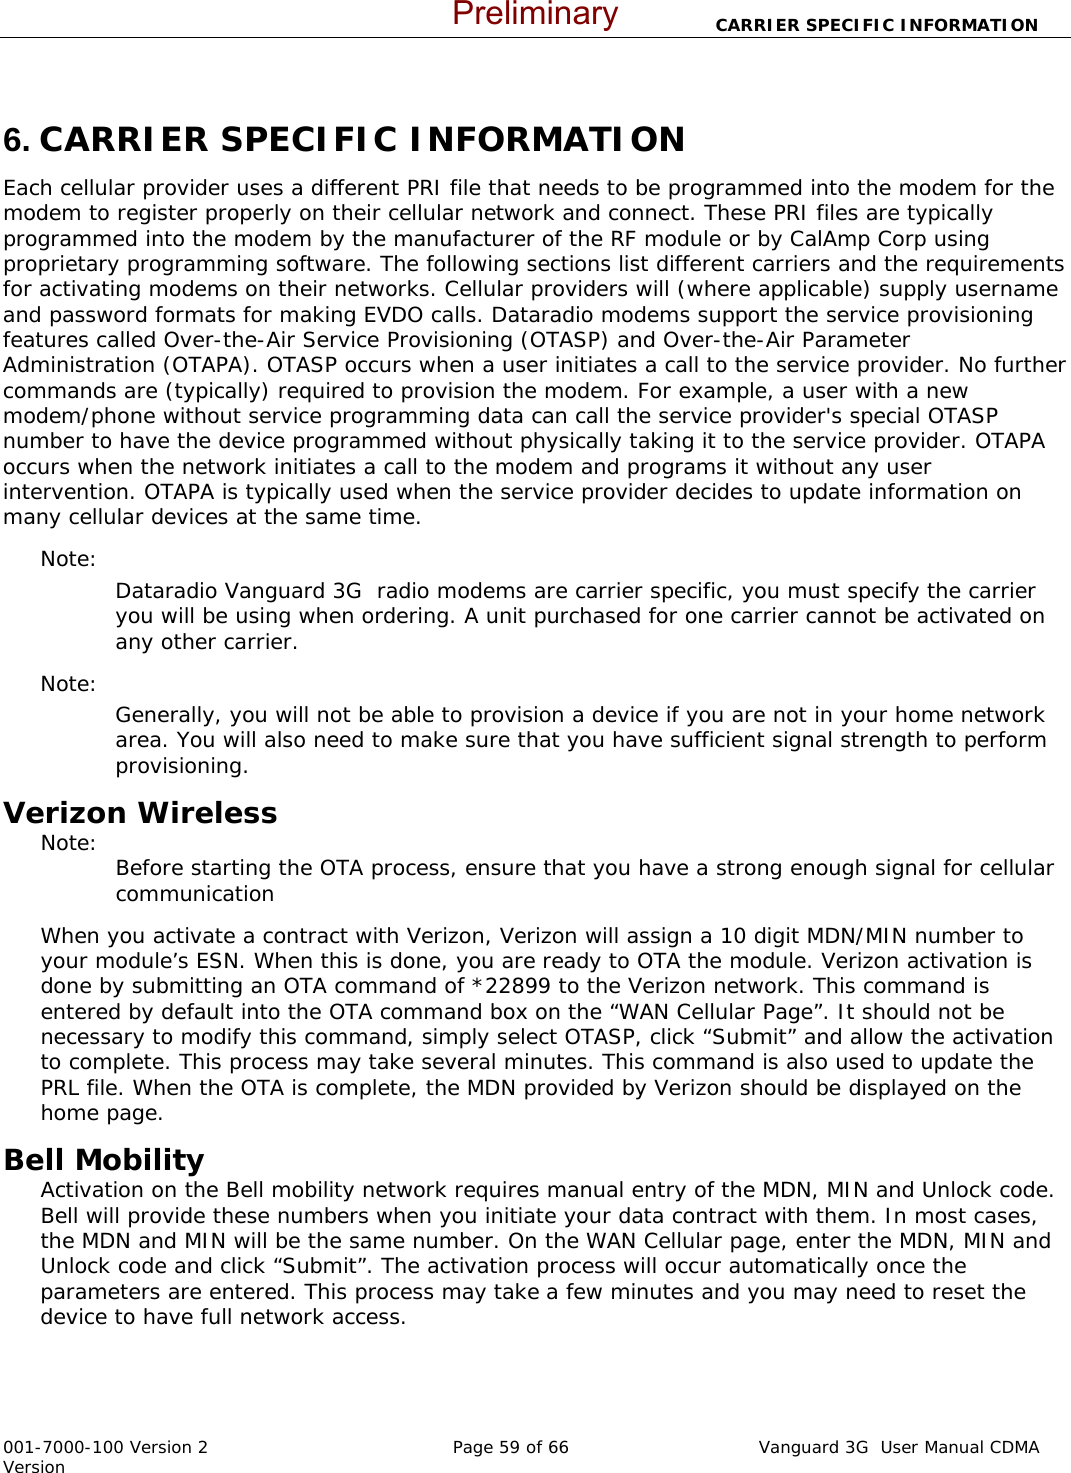                       CARRIER SPECIFIC INFORMATION  001-7000-100 Version 2       Page 59 of 66       Vanguard 3G  User Manual CDMA Version  6. CARRIER SPECIFIC INFORMATION Each cellular provider uses a different PRI file that needs to be programmed into the modem for the modem to register properly on their cellular network and connect. These PRI files are typically programmed into the modem by the manufacturer of the RF module or by CalAmp Corp using proprietary programming software. The following sections list different carriers and the requirements for activating modems on their networks. Cellular providers will (where applicable) supply username and password formats for making EVDO calls. Dataradio modems support the service provisioning features called Over-the-Air Service Provisioning (OTASP) and Over-the-Air Parameter Administration (OTAPA). OTASP occurs when a user initiates a call to the service provider. No further commands are (typically) required to provision the modem. For example, a user with a new modem/phone without service programming data can call the service provider&apos;s special OTASP number to have the device programmed without physically taking it to the service provider. OTAPA occurs when the network initiates a call to the modem and programs it without any user intervention. OTAPA is typically used when the service provider decides to update information on many cellular devices at the same time. Note:   Dataradio Vanguard 3G  radio modems are carrier specific, you must specify the carrier you will be using when ordering. A unit purchased for one carrier cannot be activated on any other carrier.   Note:   Generally, you will not be able to provision a device if you are not in your home network area. You will also need to make sure that you have sufficient signal strength to perform provisioning.   Verizon Wireless  Note:   Before starting the OTA process, ensure that you have a strong enough signal for cellular communication When you activate a contract with Verizon, Verizon will assign a 10 digit MDN/MIN number to your module’s ESN. When this is done, you are ready to OTA the module. Verizon activation is done by submitting an OTA command of *22899 to the Verizon network. This command is entered by default into the OTA command box on the “WAN Cellular Page”. It should not be necessary to modify this command, simply select OTASP, click “Submit” and allow the activation to complete. This process may take several minutes. This command is also used to update the PRL file. When the OTA is complete, the MDN provided by Verizon should be displayed on the home page.   Bell Mobility Activation on the Bell mobility network requires manual entry of the MDN, MIN and Unlock code.  Bell will provide these numbers when you initiate your data contract with them. In most cases, the MDN and MIN will be the same number. On the WAN Cellular page, enter the MDN, MIN and Unlock code and click “Submit”. The activation process will occur automatically once the parameters are entered. This process may take a few minutes and you may need to reset the device to have full network access.    Preliminary